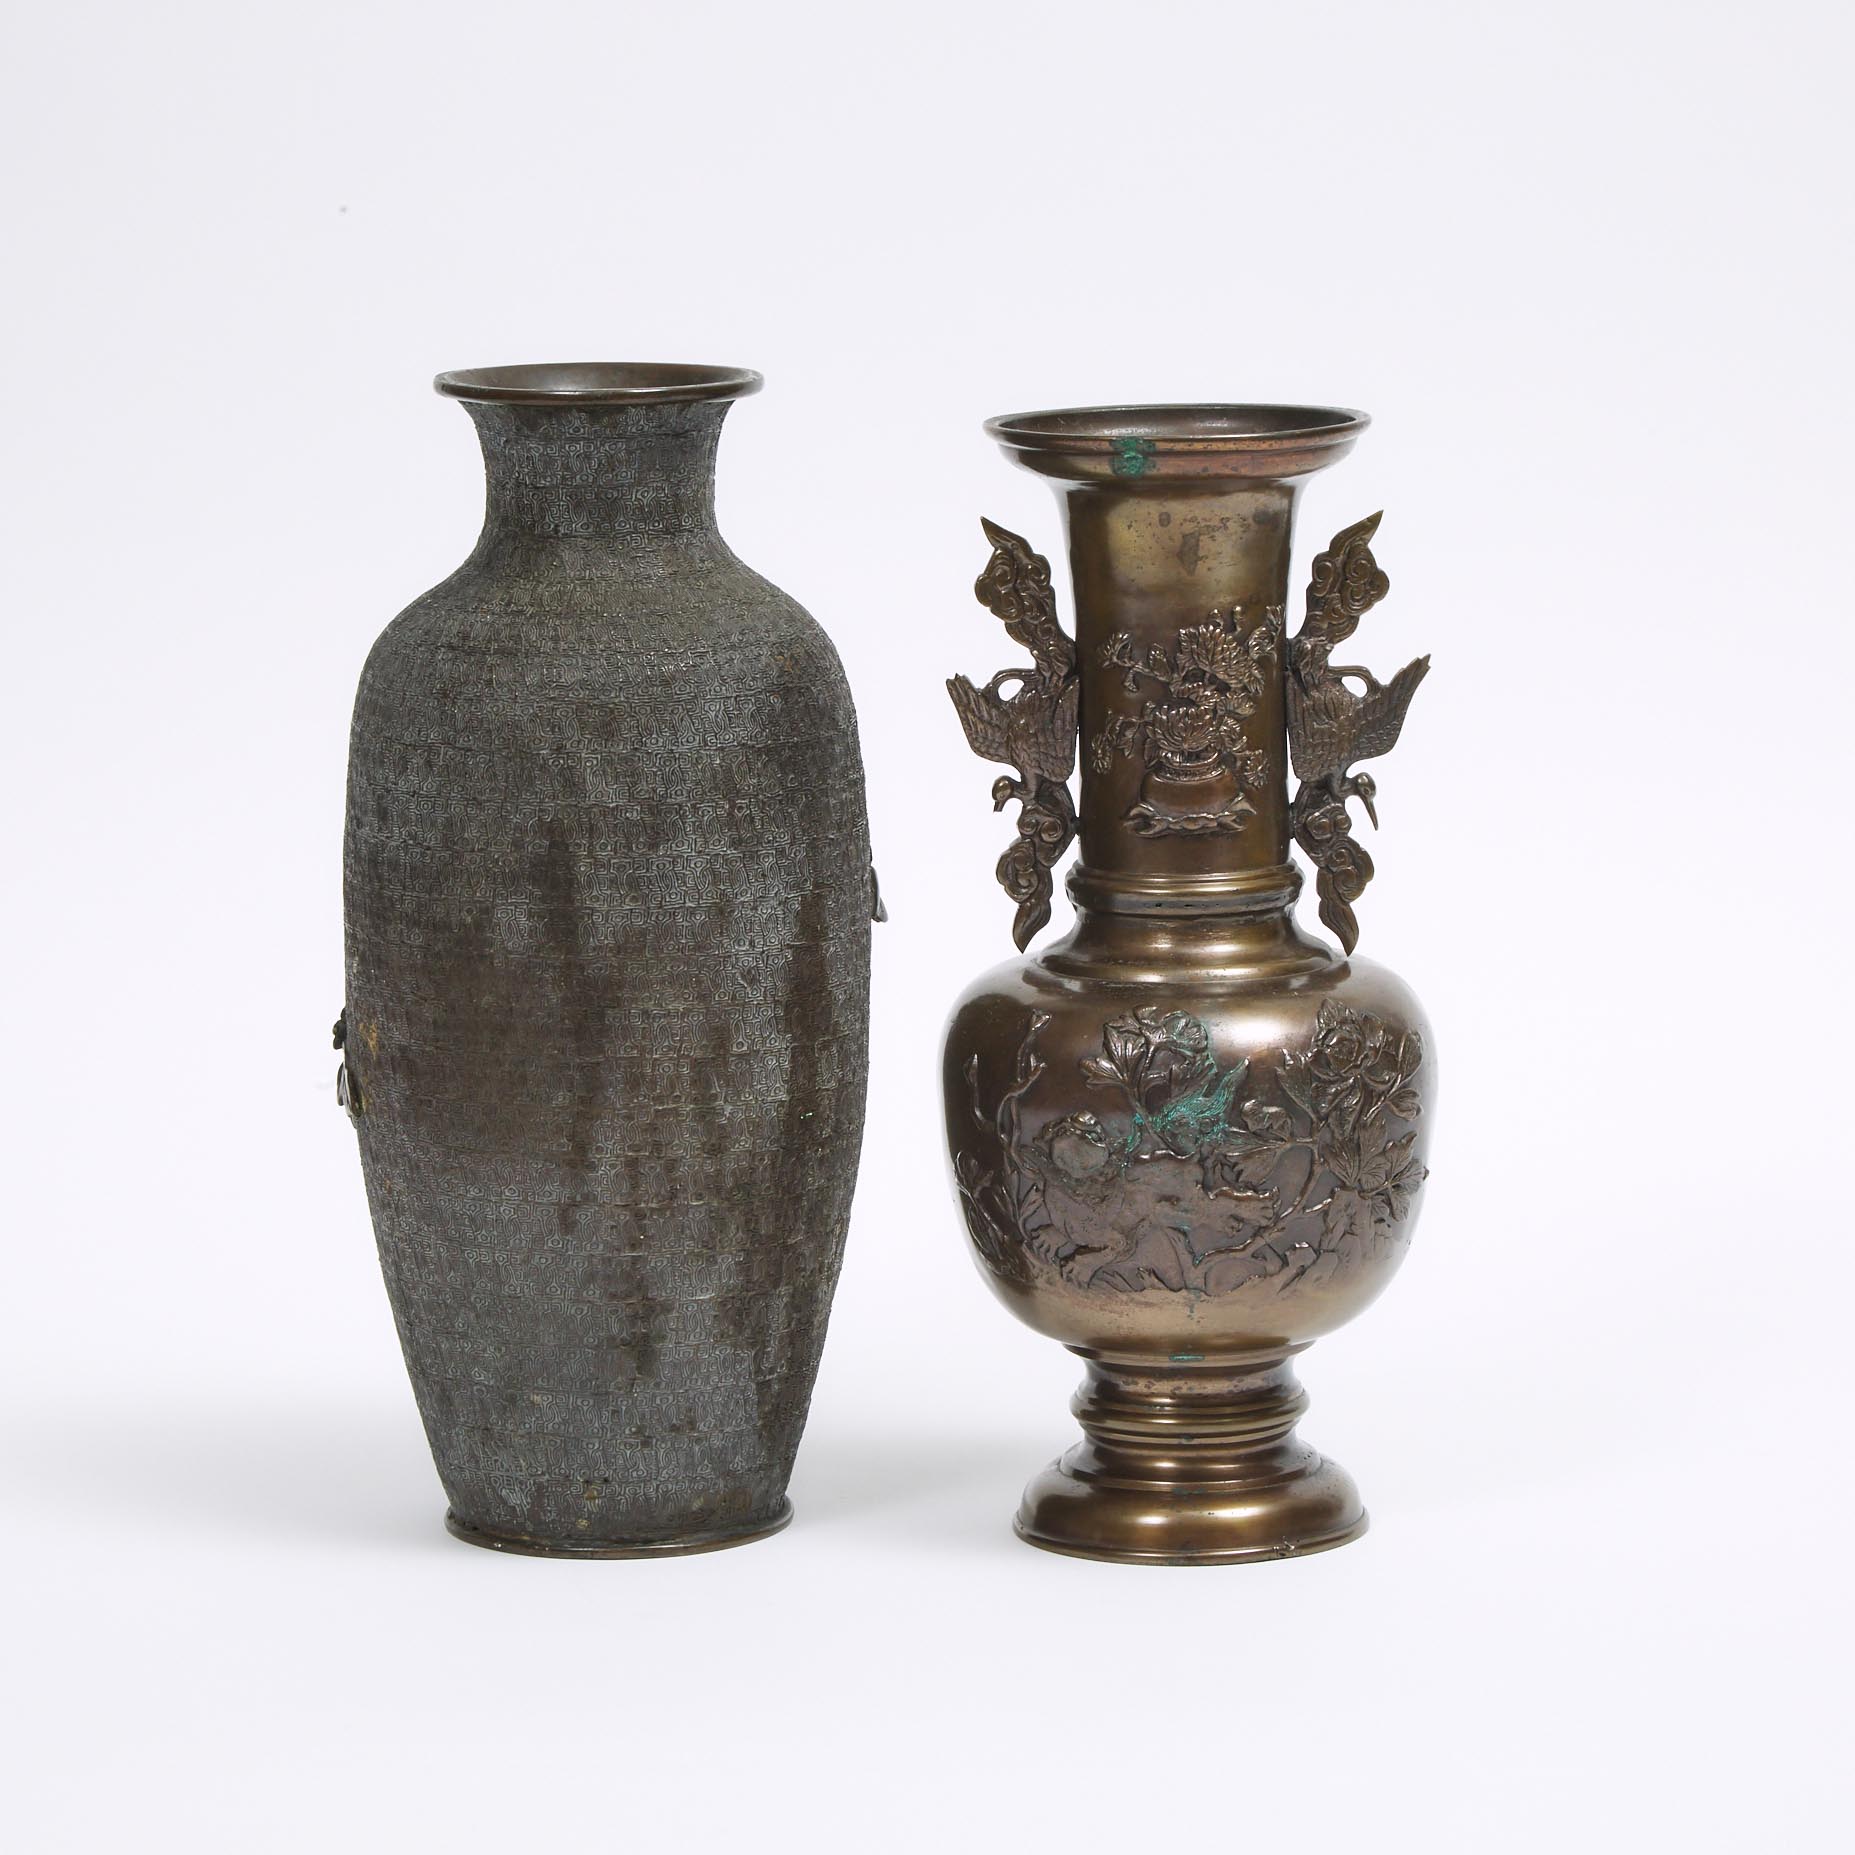 Two Bronze Vases, 19th Century or Later